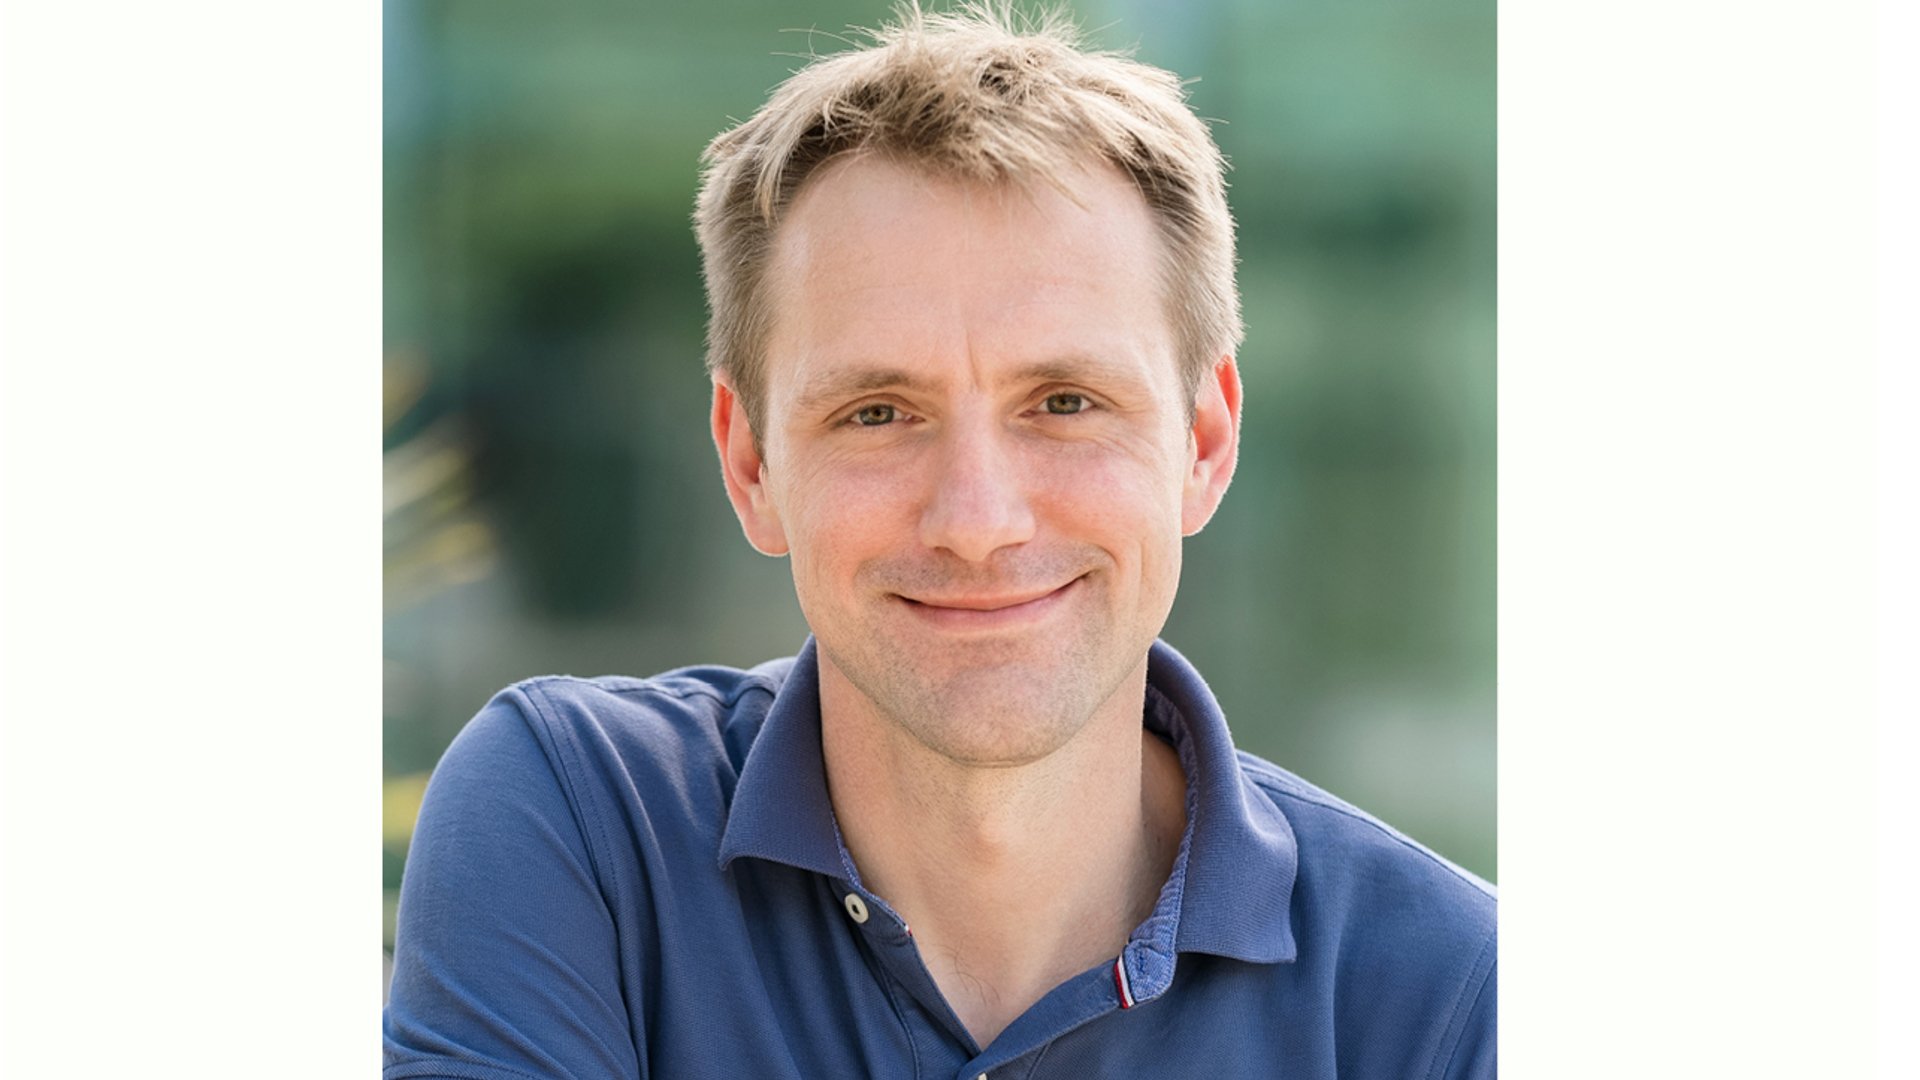 Stefan Hamann, Co-CEO and founder of Shopware